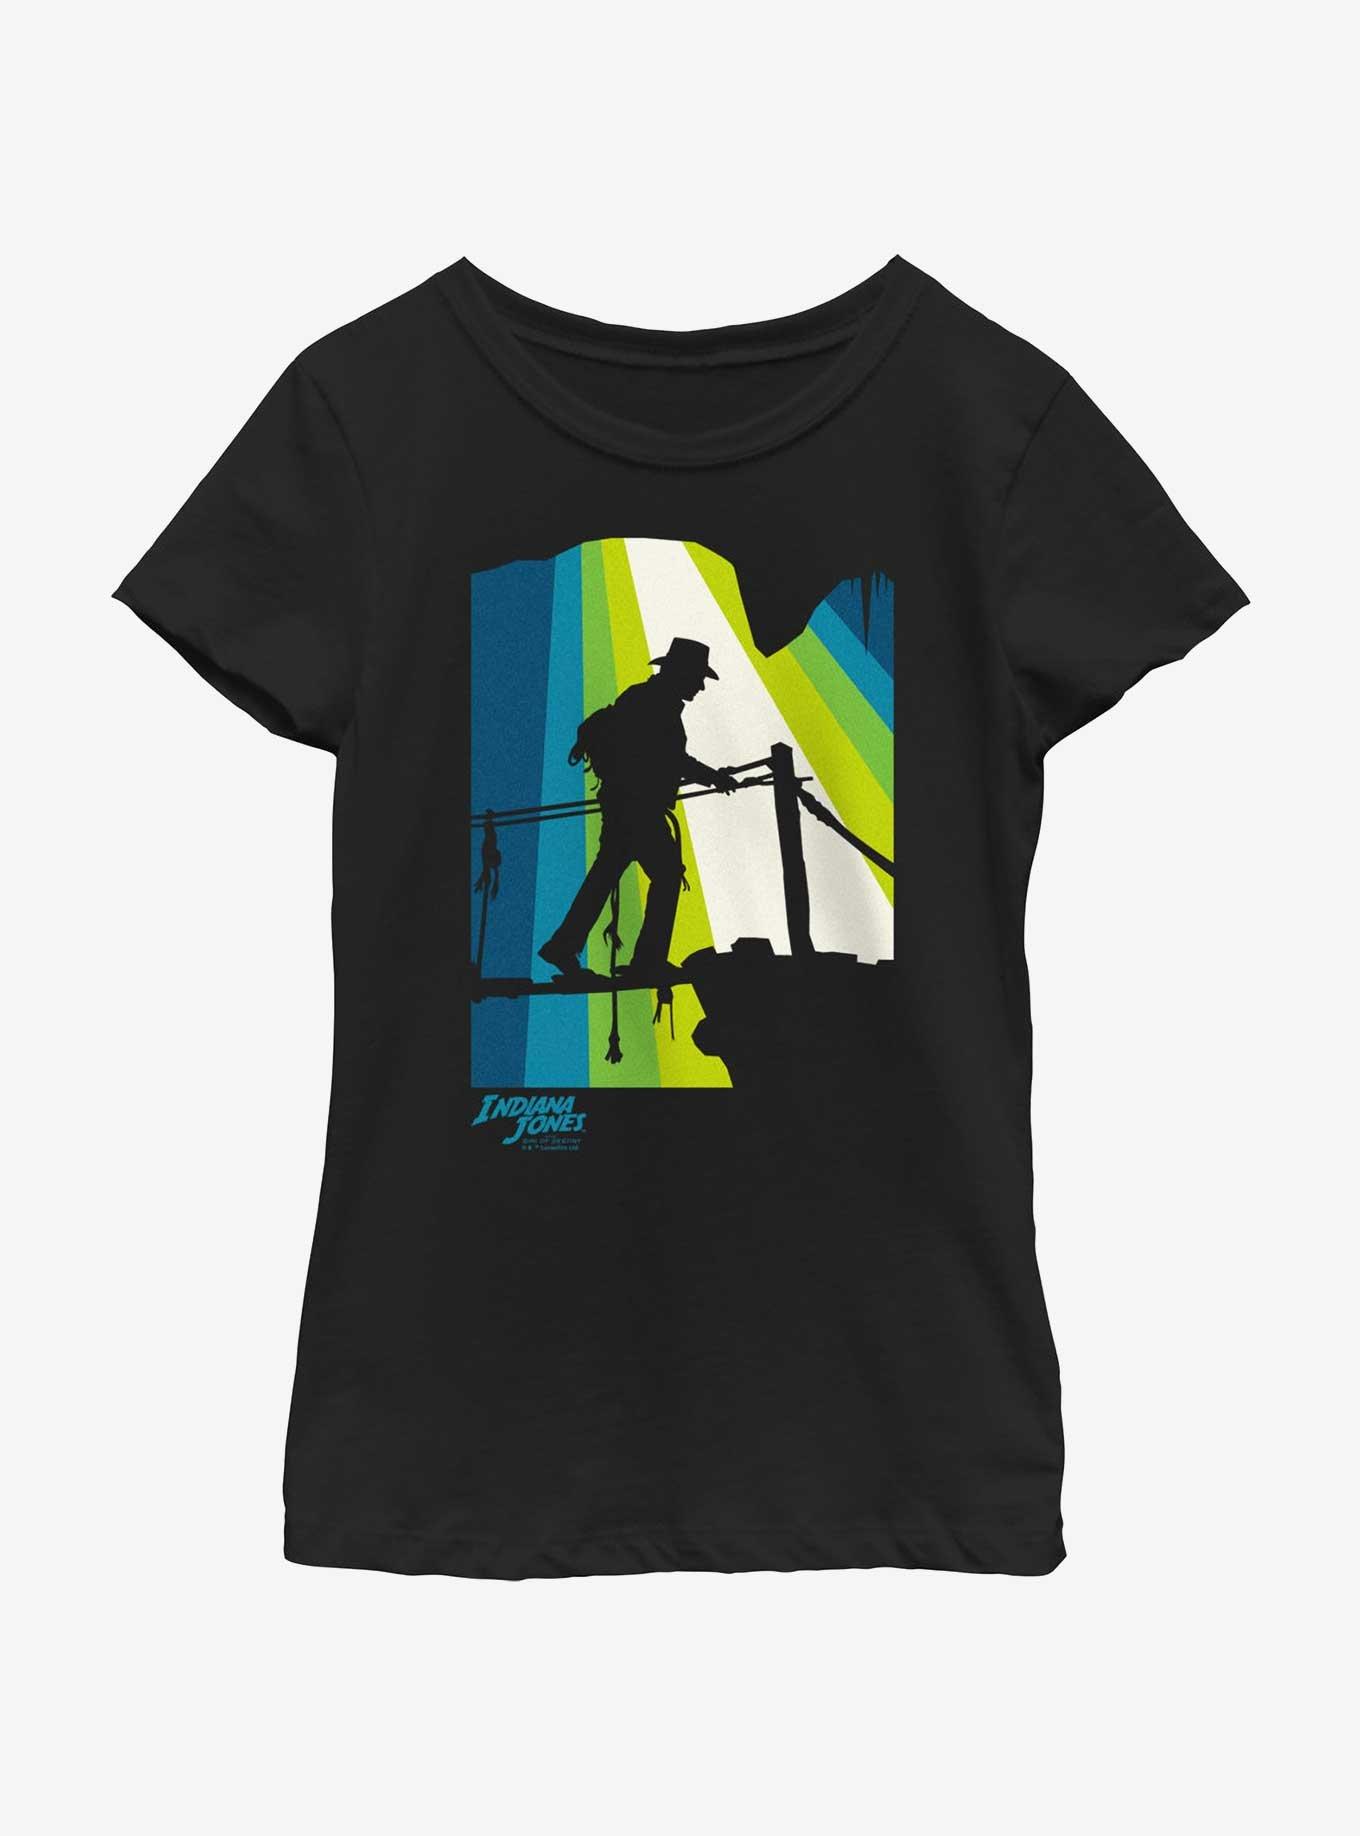 Indiana Jones and the Dial of Destiny Exploring Caves Girls Youth T-Shirt, BLACK, hi-res